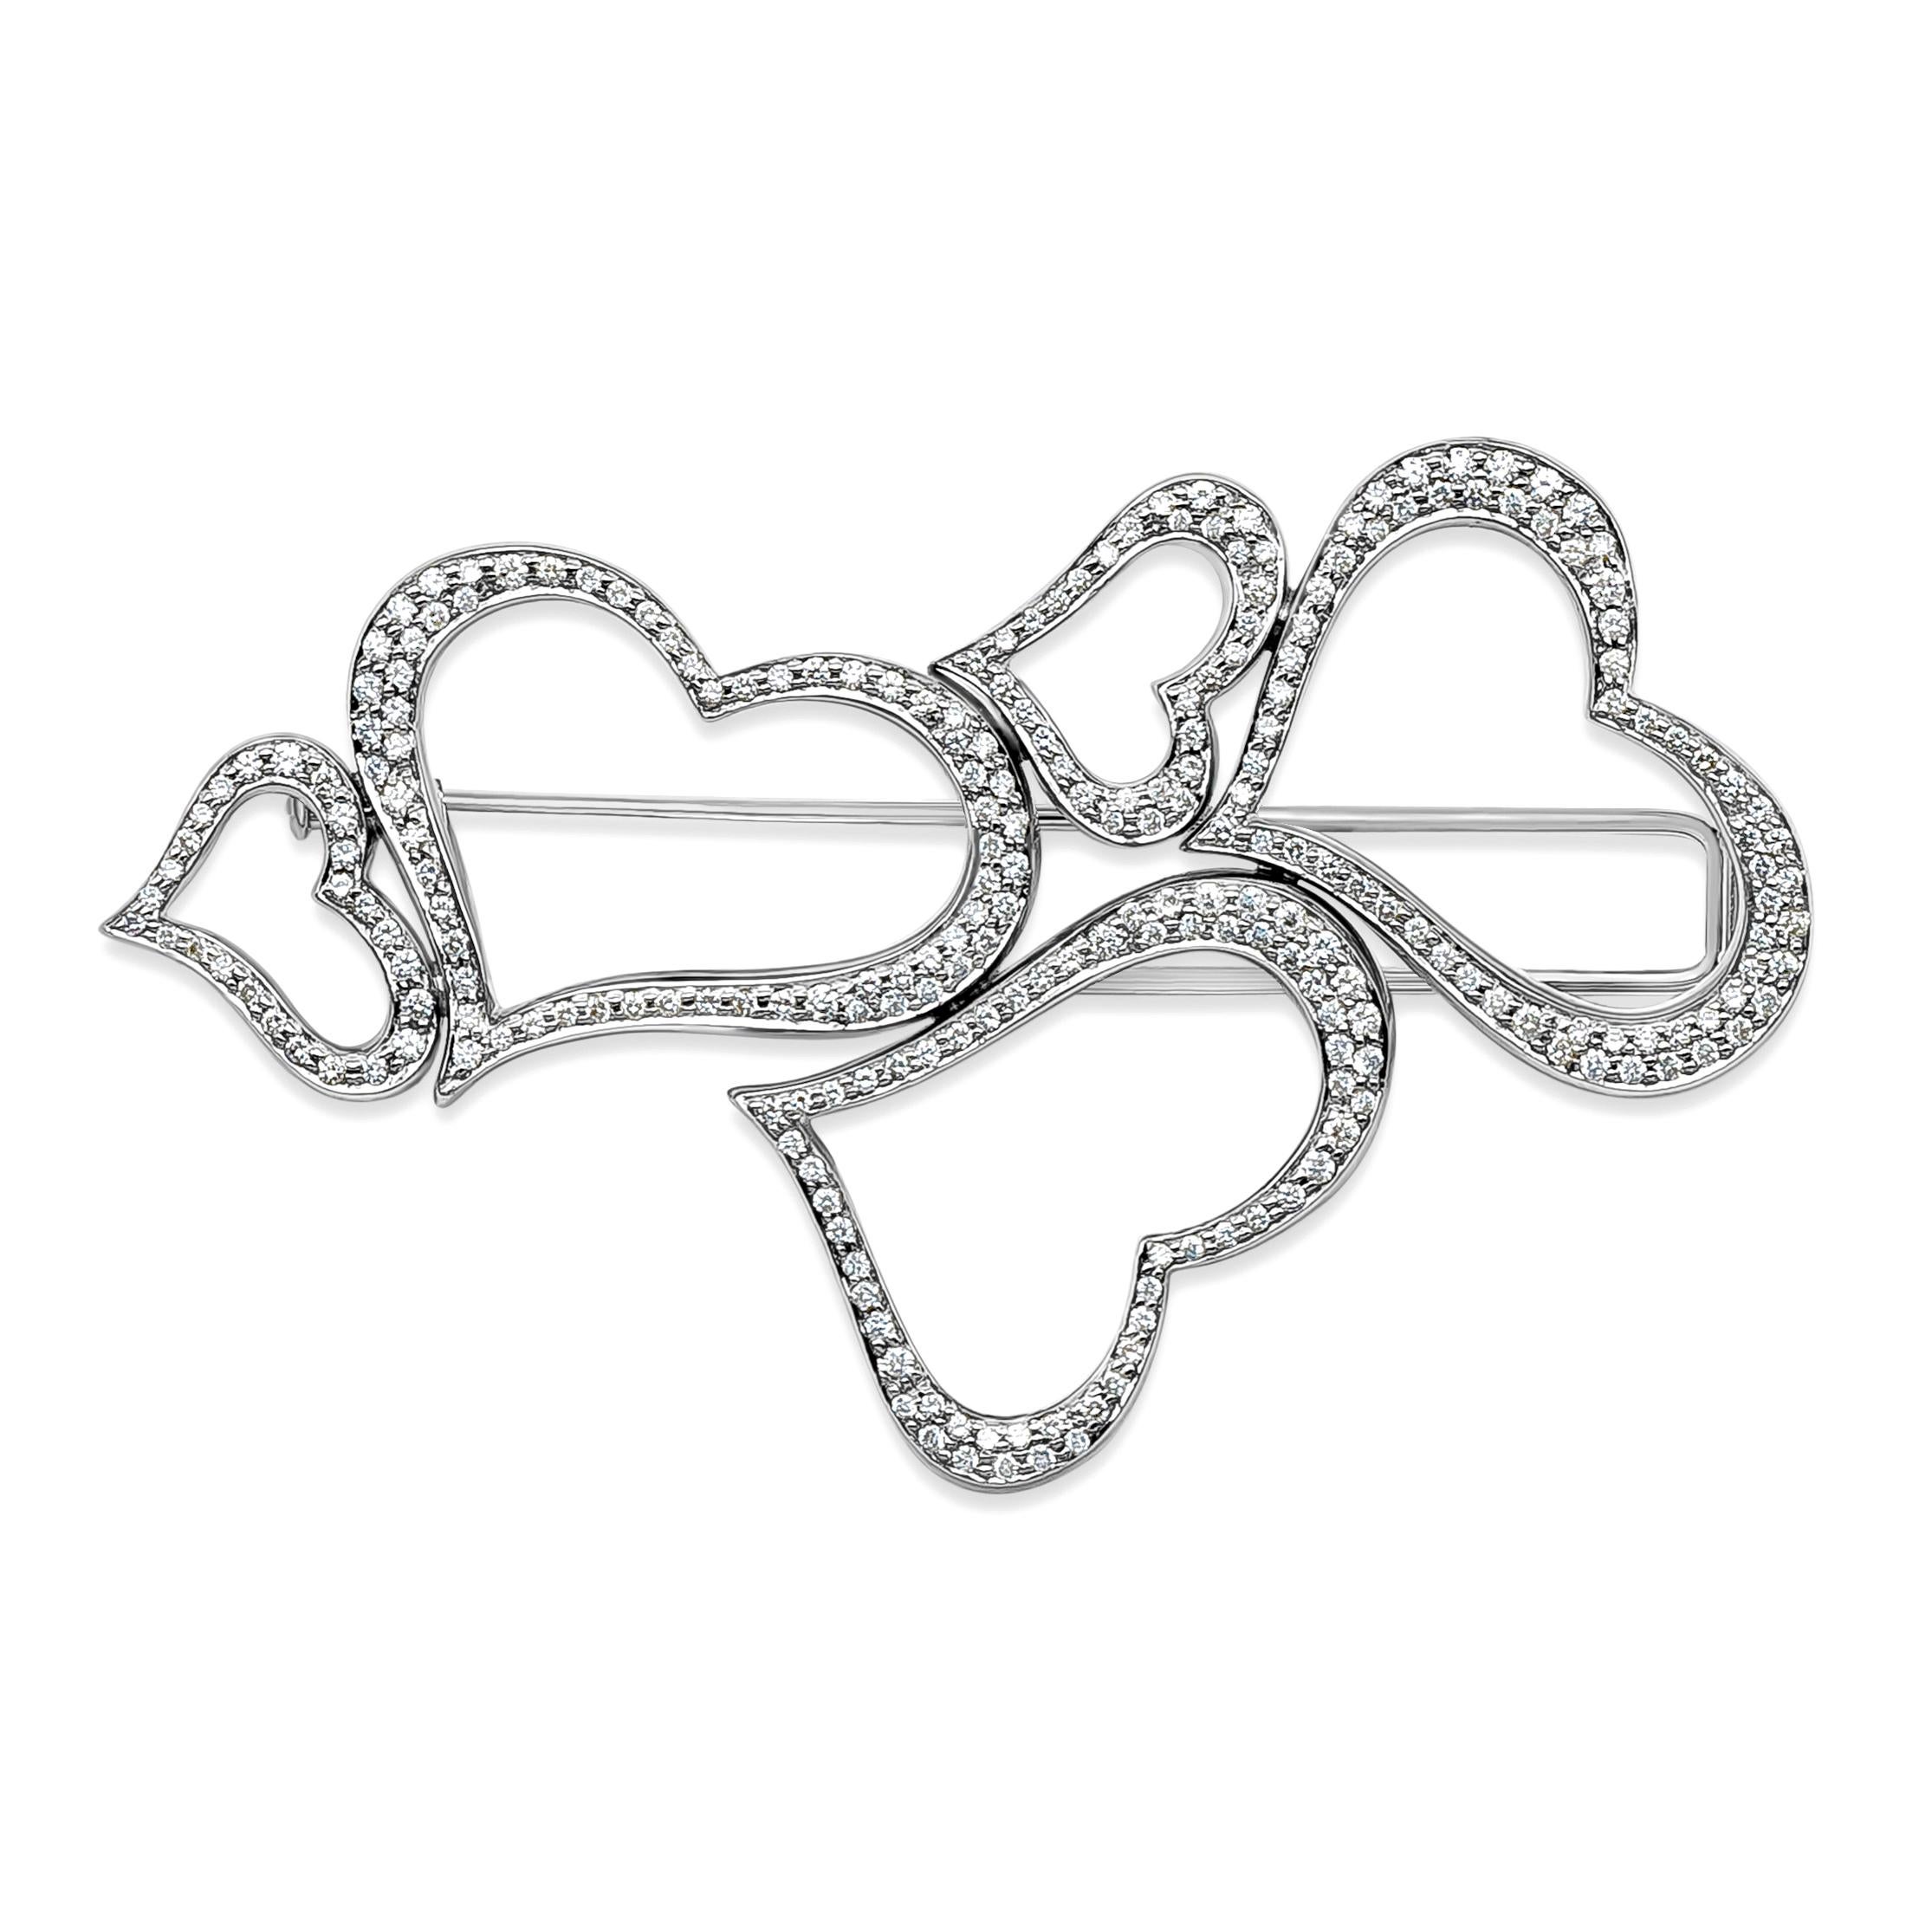 A unique and classic heart brooch, showcasing 2.30 carats total of round brilliant cut diamonds with D-E-F color and VVS clarity. Beautifully set in an open-work heart design. Made with 18K white gold, 3.10 inches in length and 1.80 inches in width.